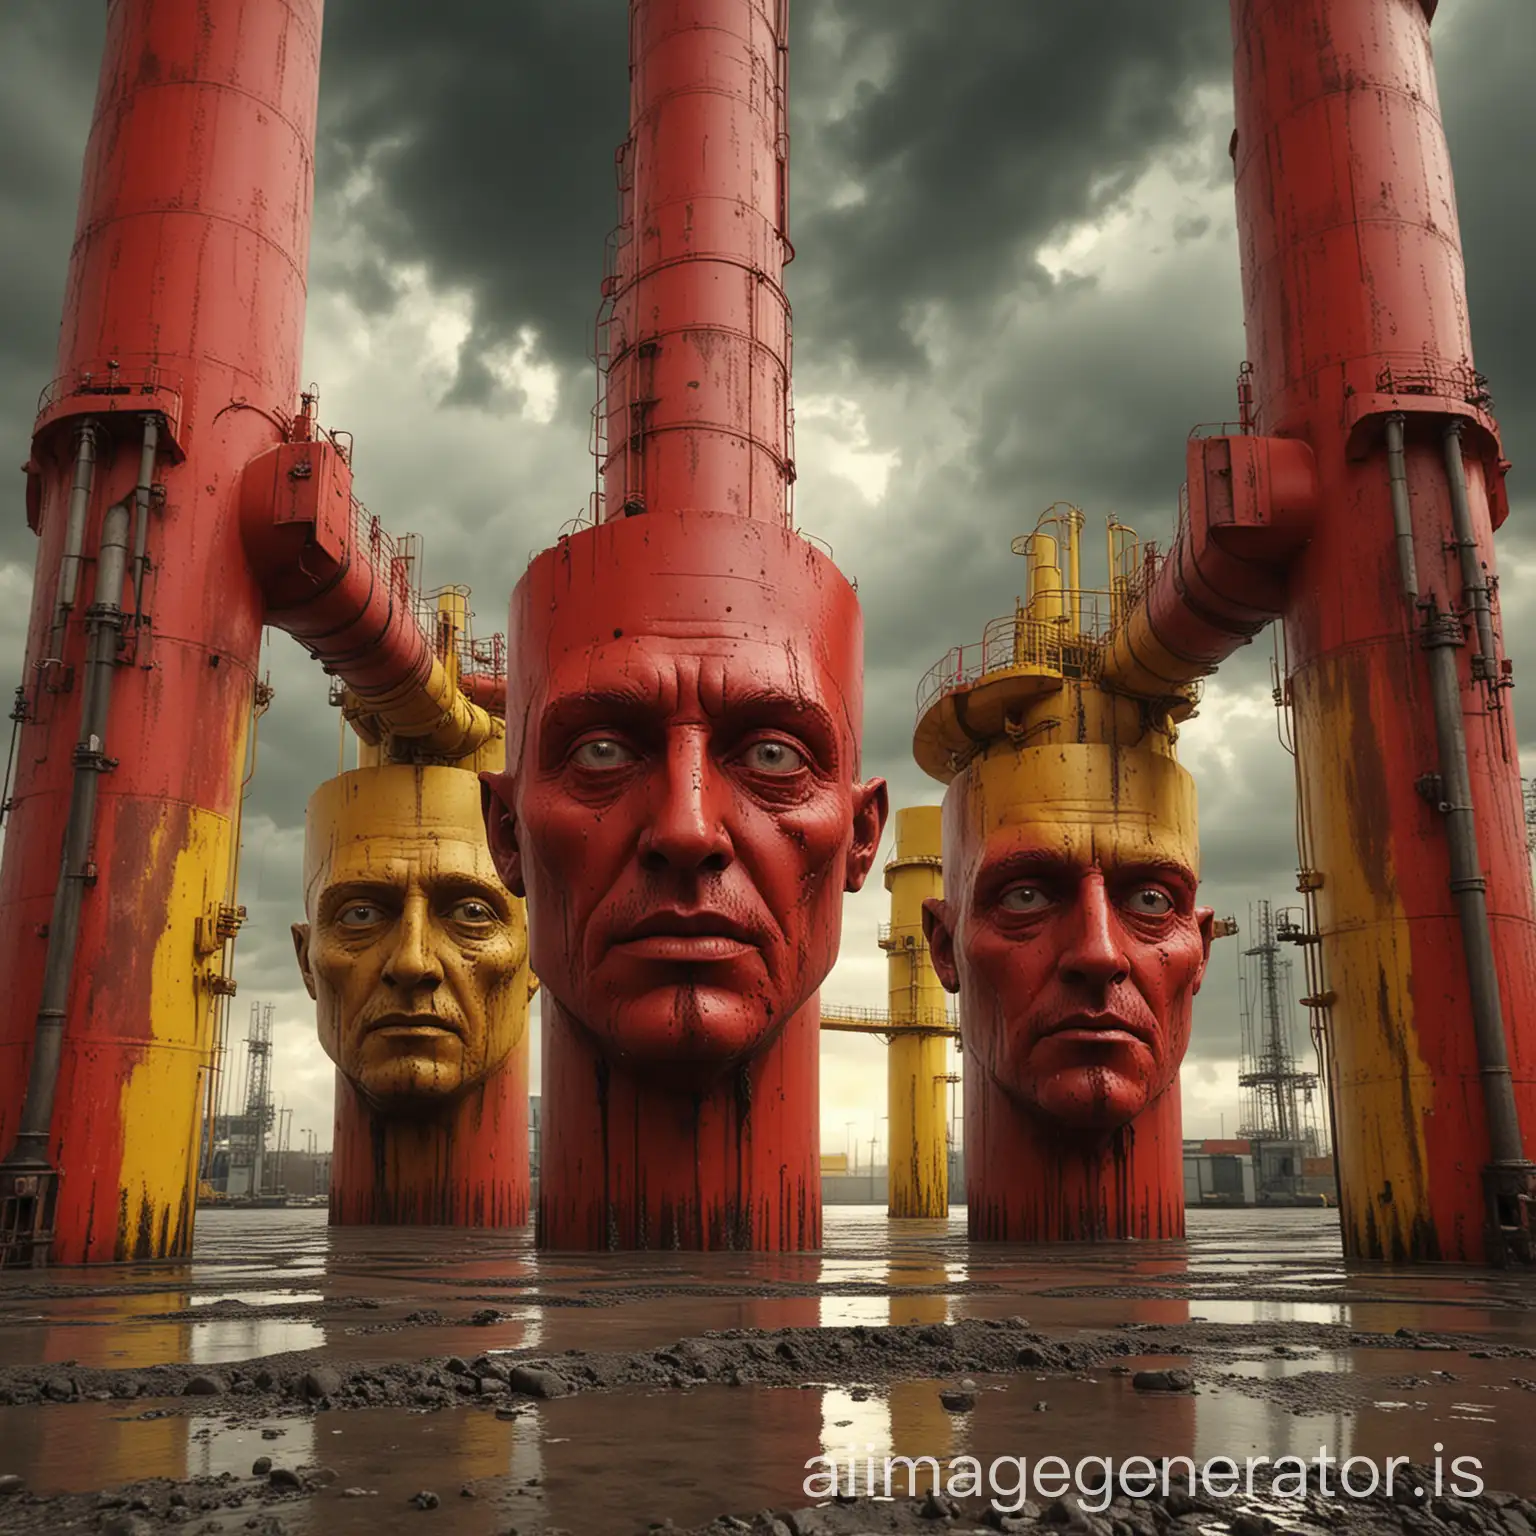 three surreal man-face-trapezoidal-aquasuiton bolts-tubes,concrete buildings, distillation petrochemical columns, red palette and acid yellow color, PL photo filter, black clouds,Ray Tracing Global Illumination, Optics, Scattering ,Glow,insanely detailed and intricate,superdetailed